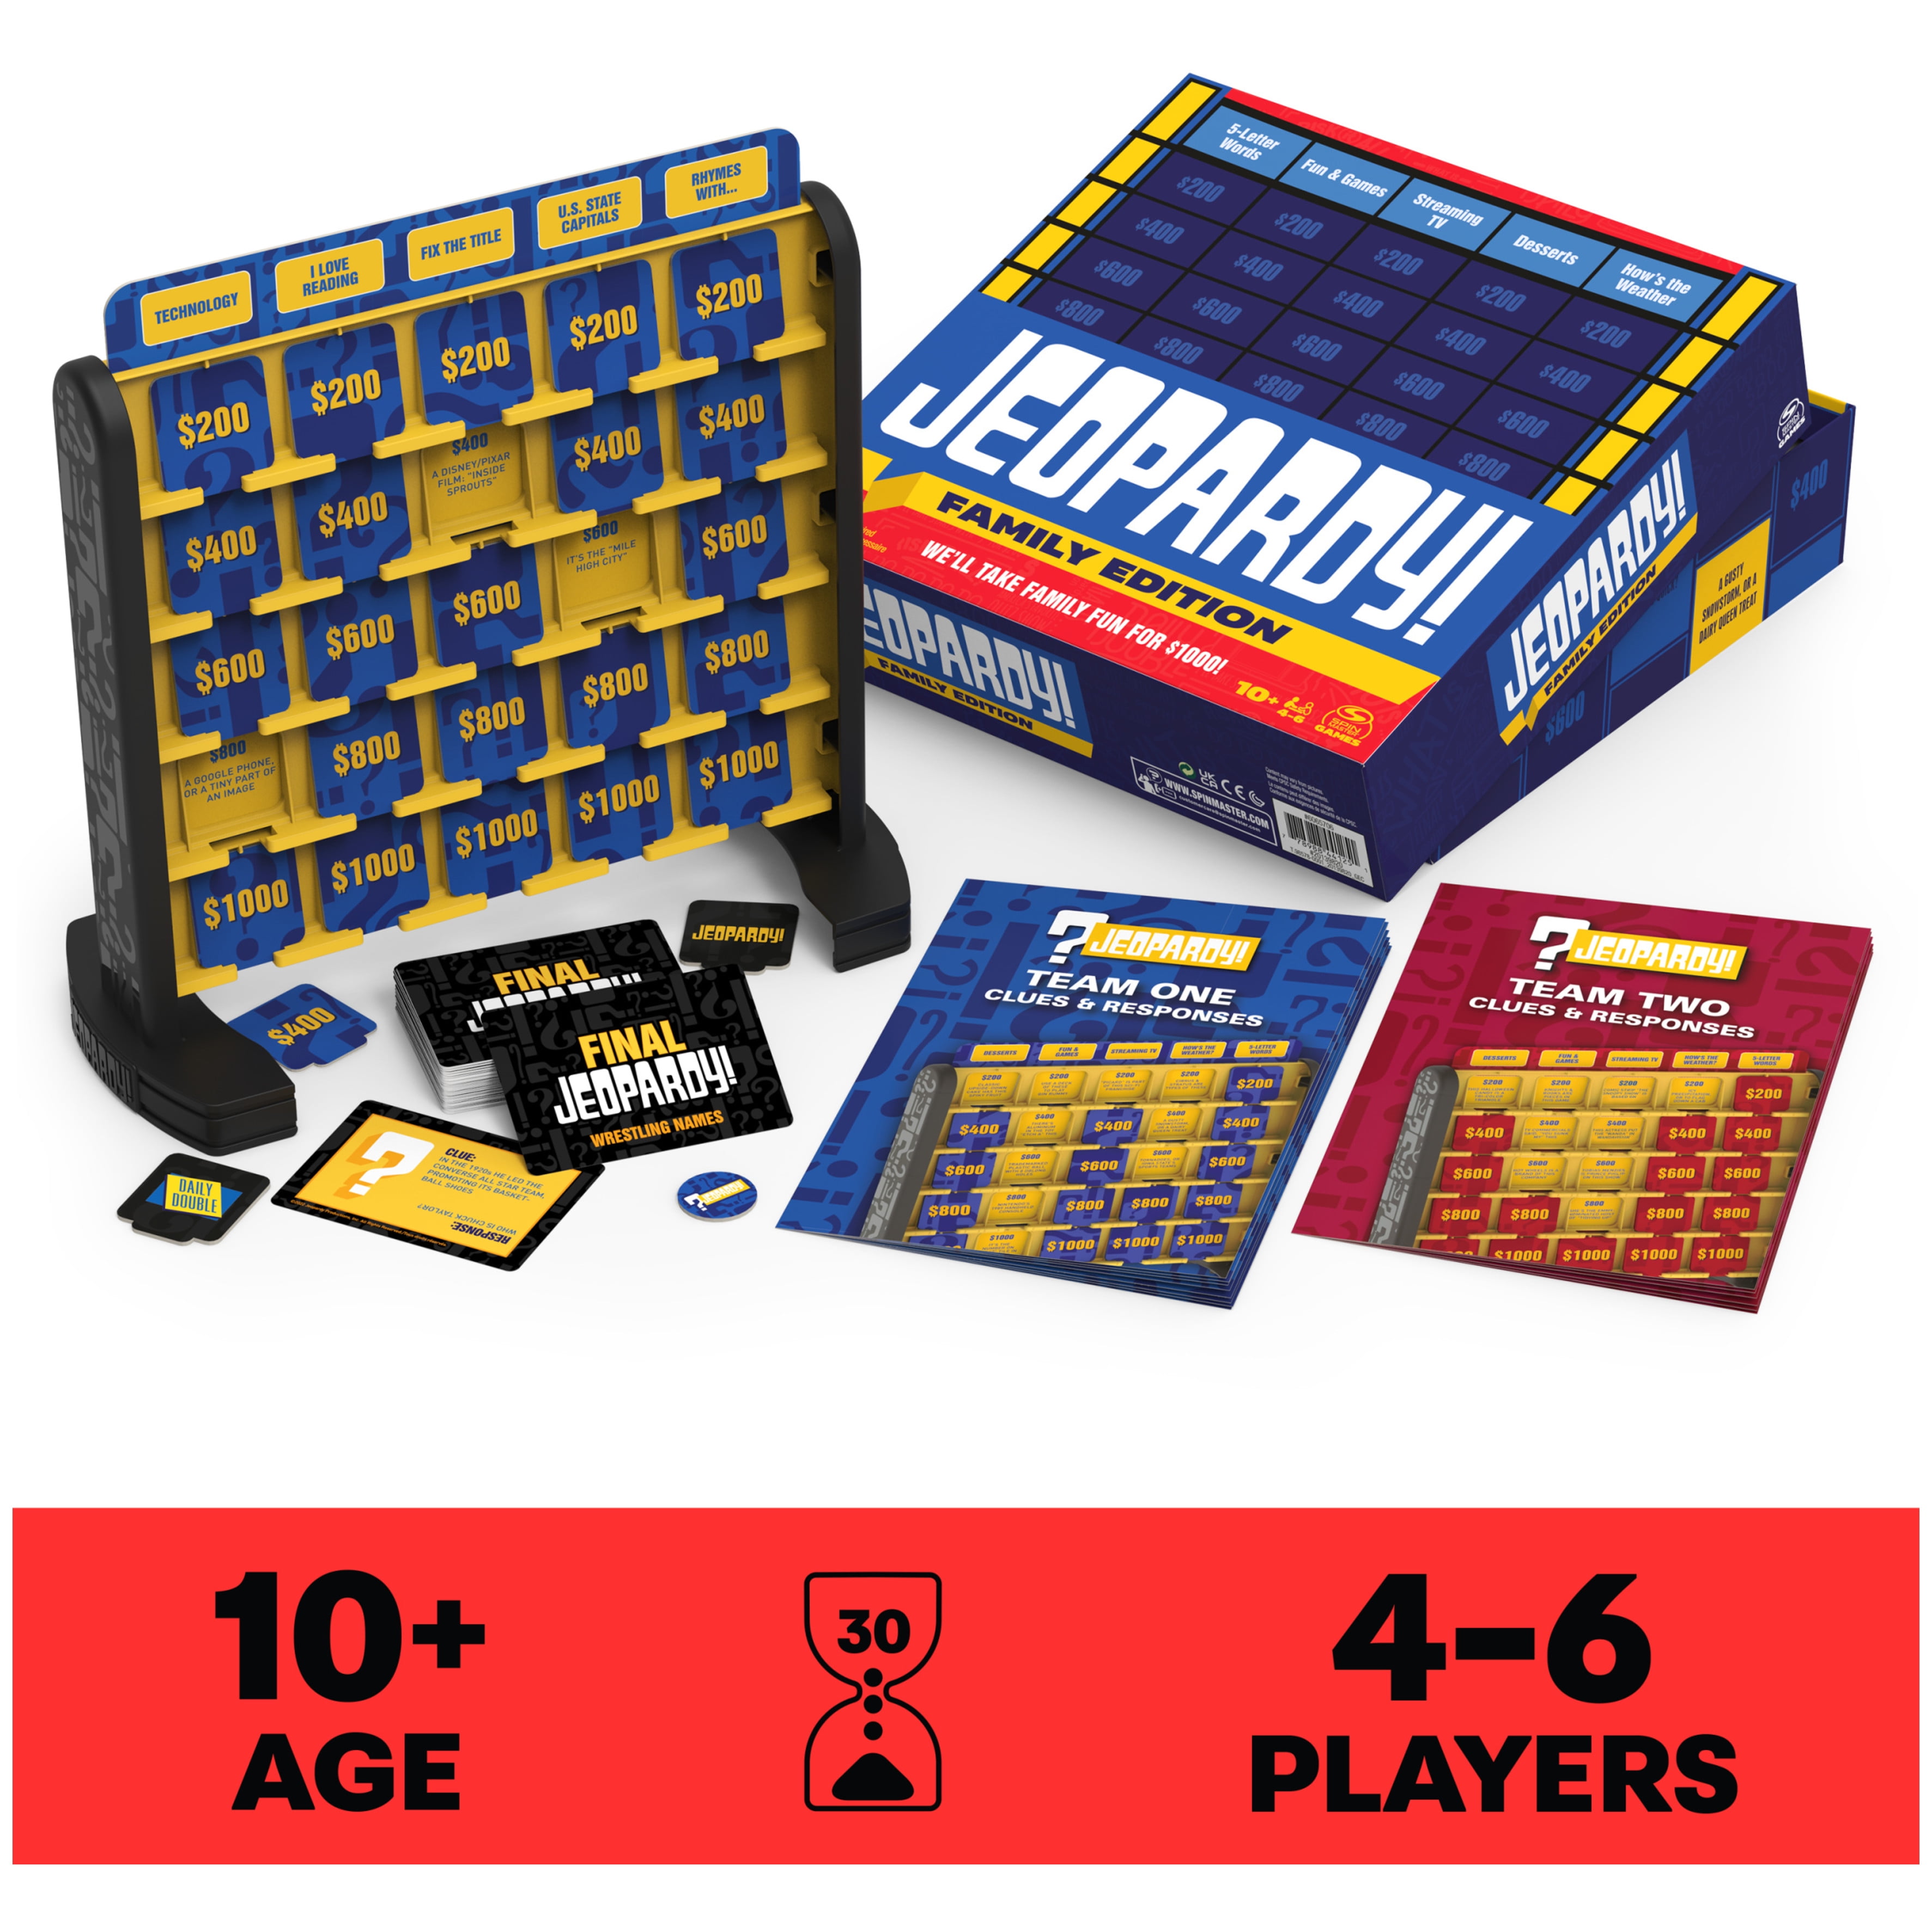 Jeopardy! The Fast-Moving Game of Questions and Answers, Play at Home with  Friends, Family, Remote Home Entertainment, Get Excited and Fired Up